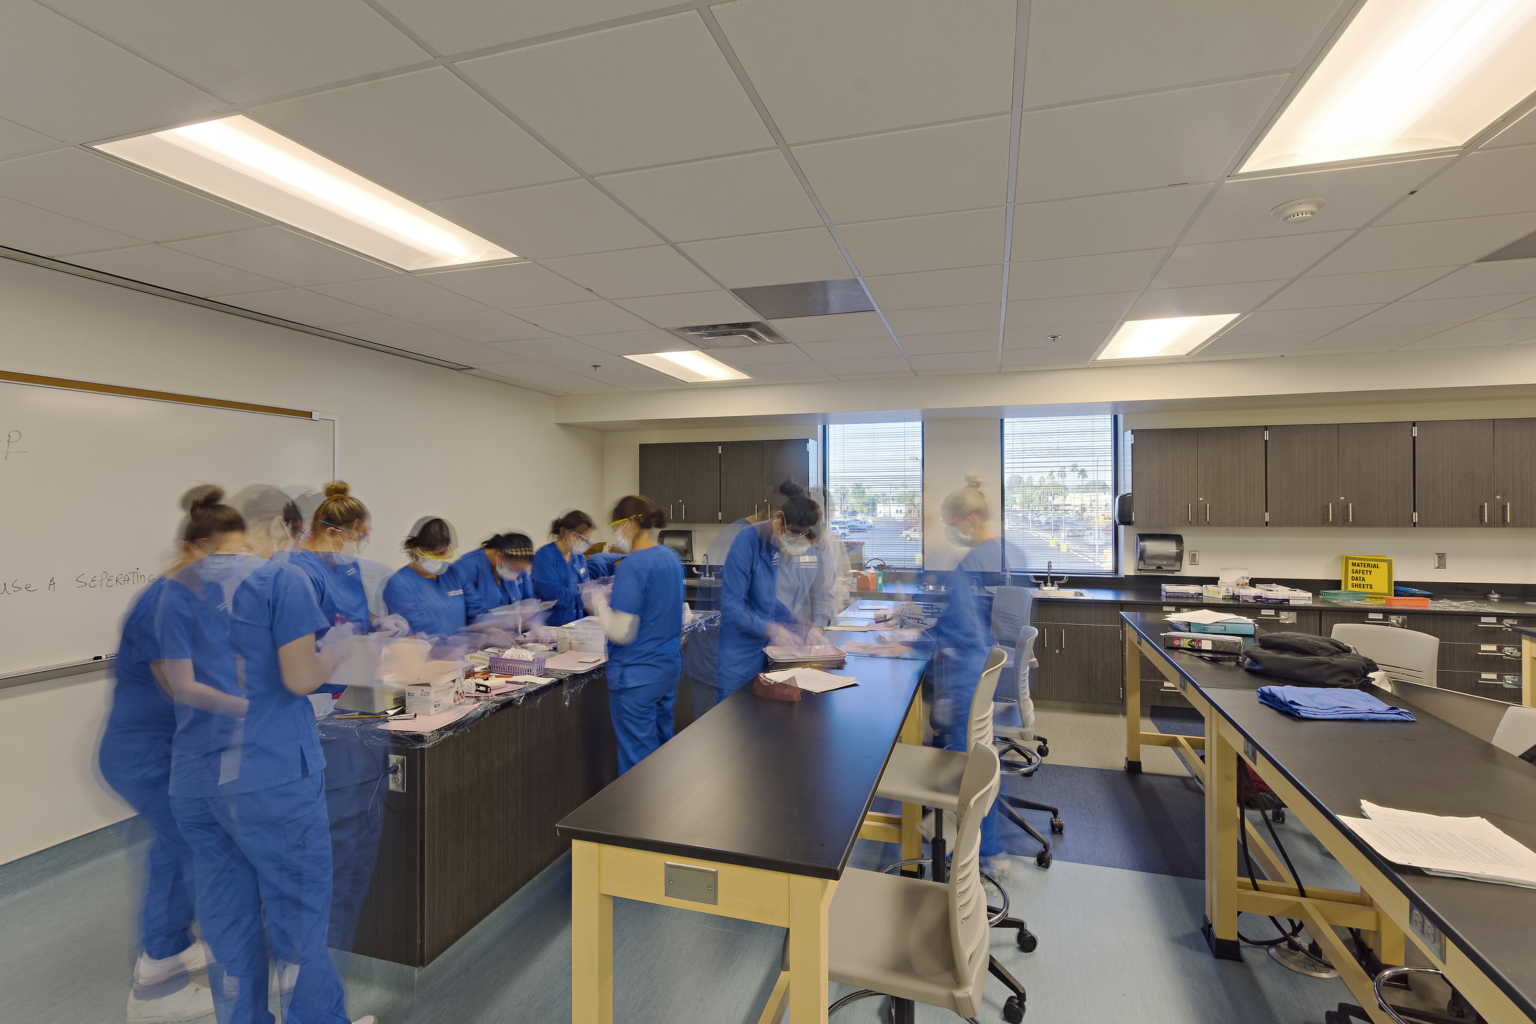 students in blue scrubs working at a lab station with a whiteboard behind them and daylight shining in from the far exterior windows